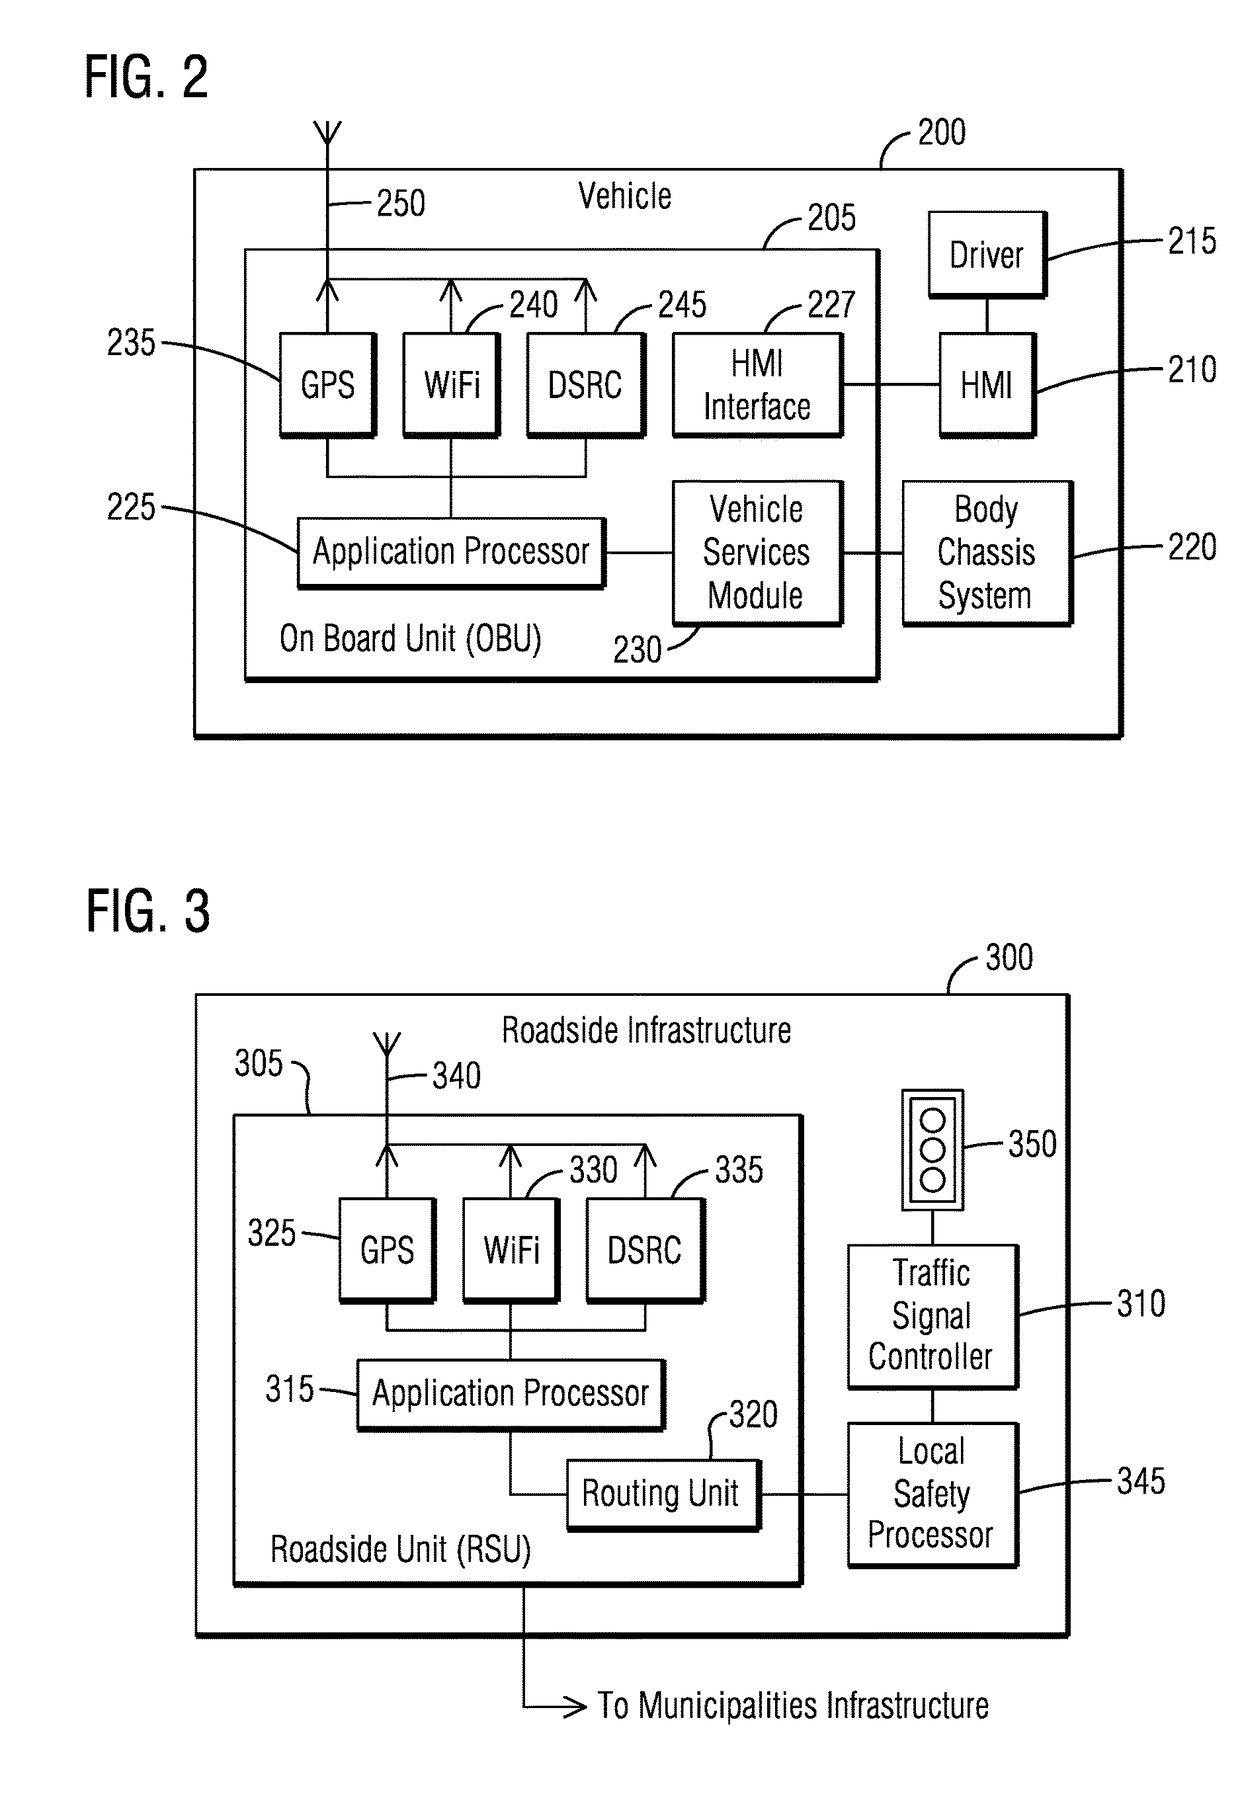 Connected vehicle traffic safety system and a method of predicting and avoiding crashes at railroad grade crossings